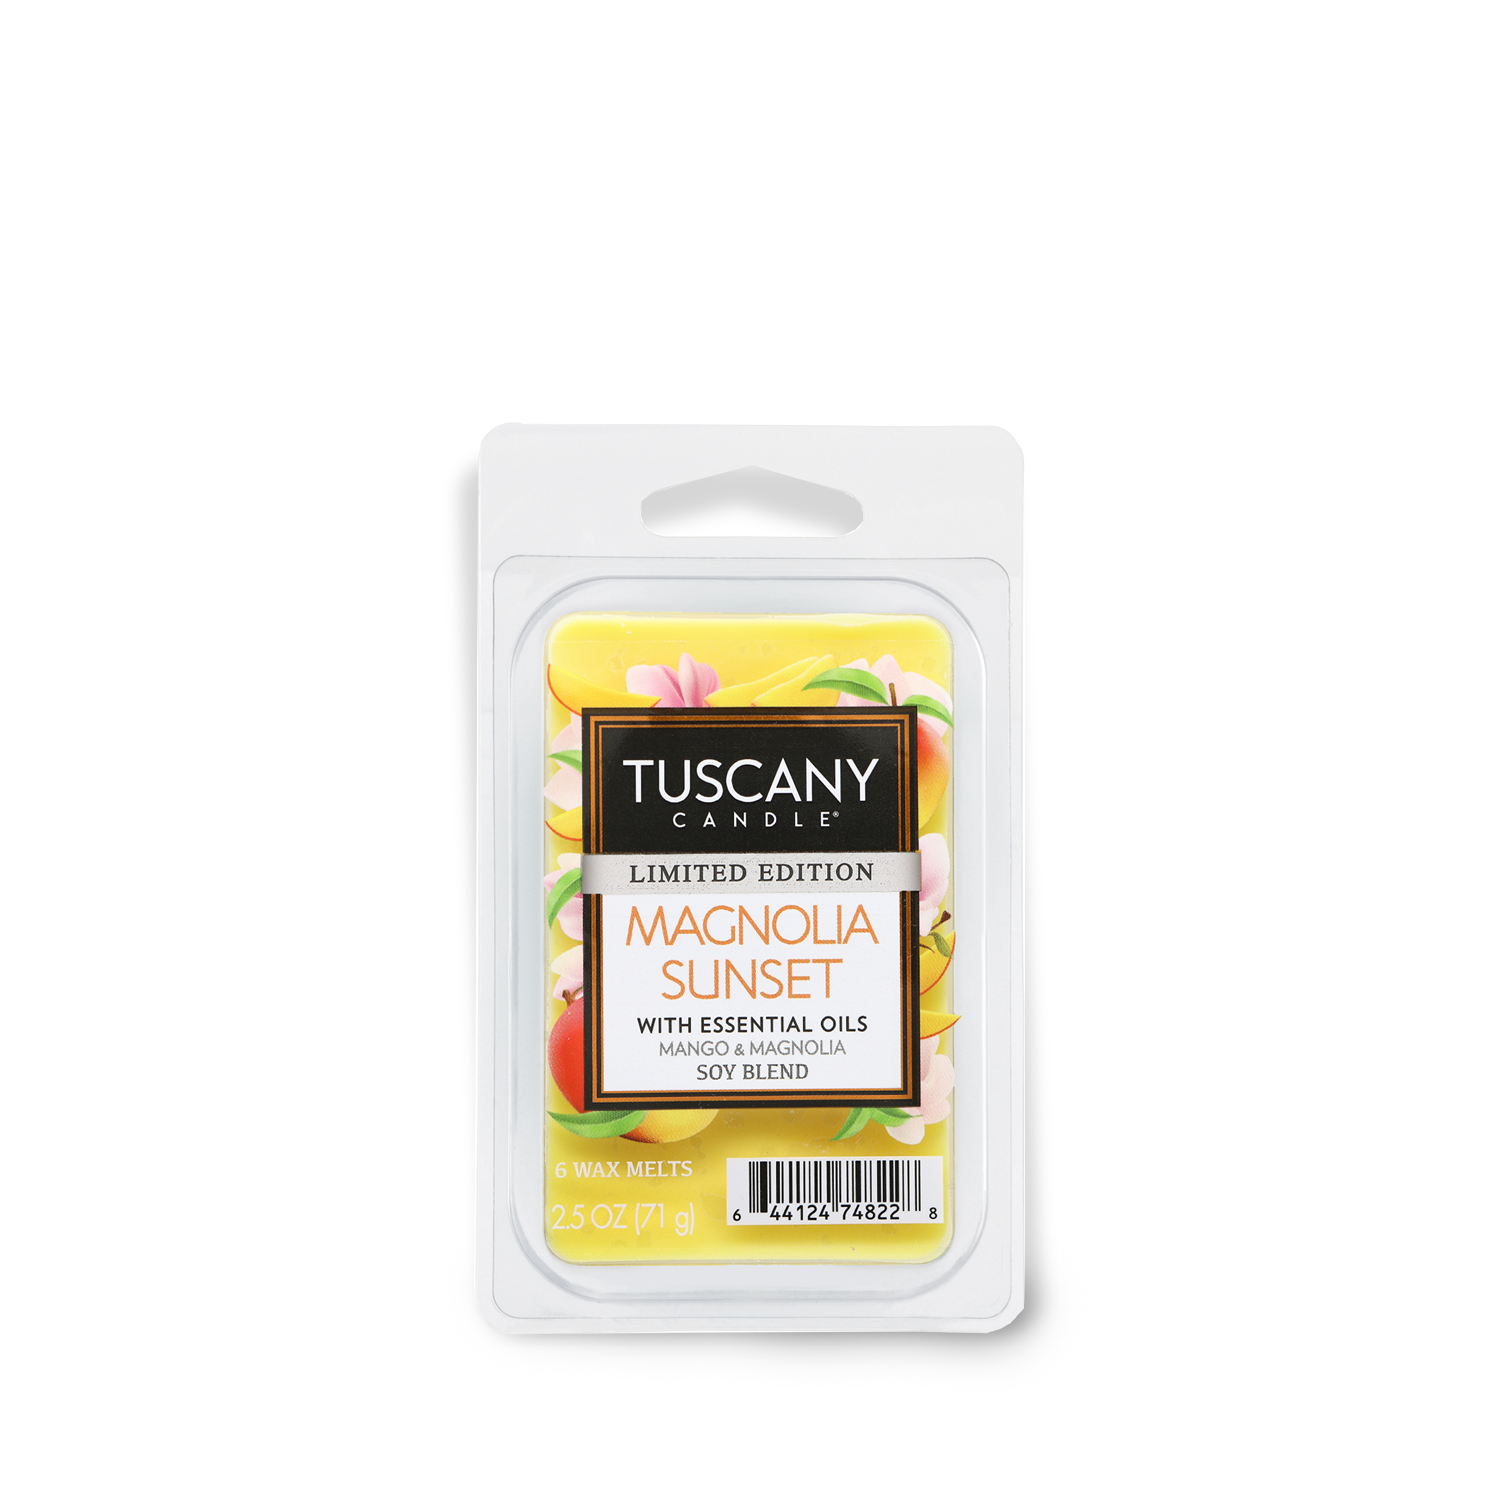 Indulge in the tropical dusk scent of a Tuscany Candle® SEASONAL Magnolia Sunset Scented Wax Melt (2.5 oz) bar, infused with magnolia sunset and mango.